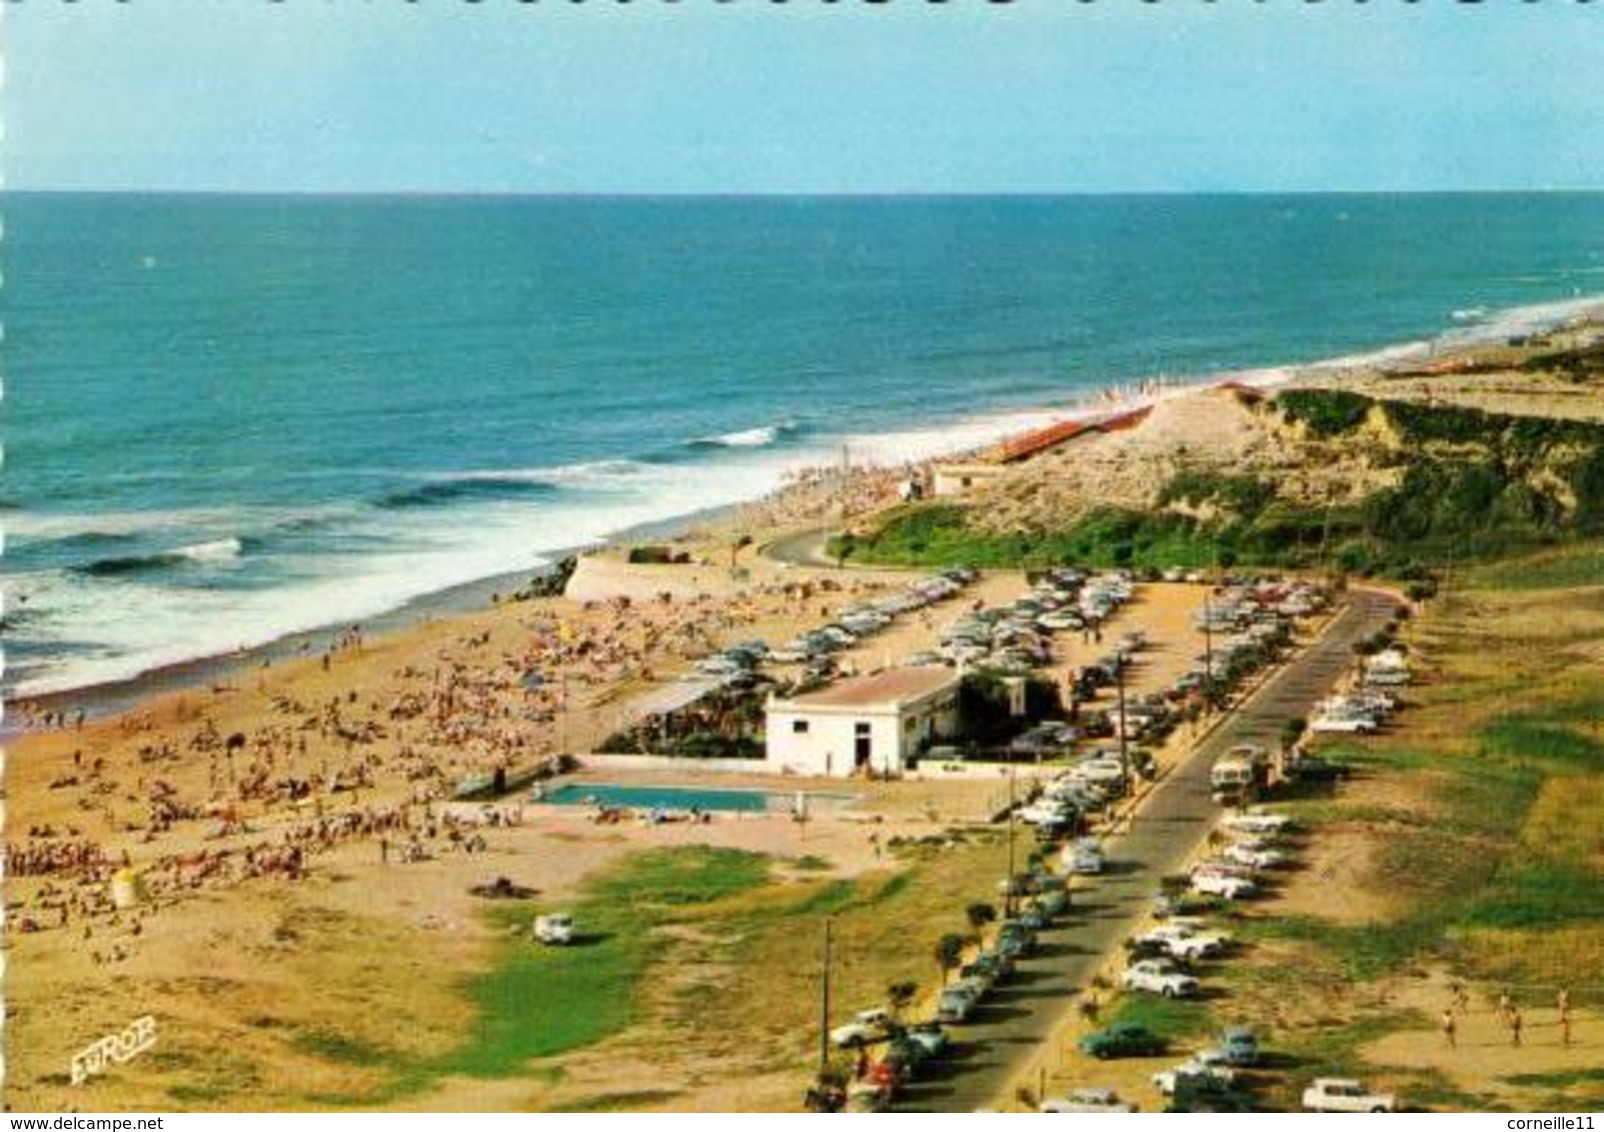 64 - ANGLET-PLAGE - LA CHAMBRE D'AMOUR - Anglet